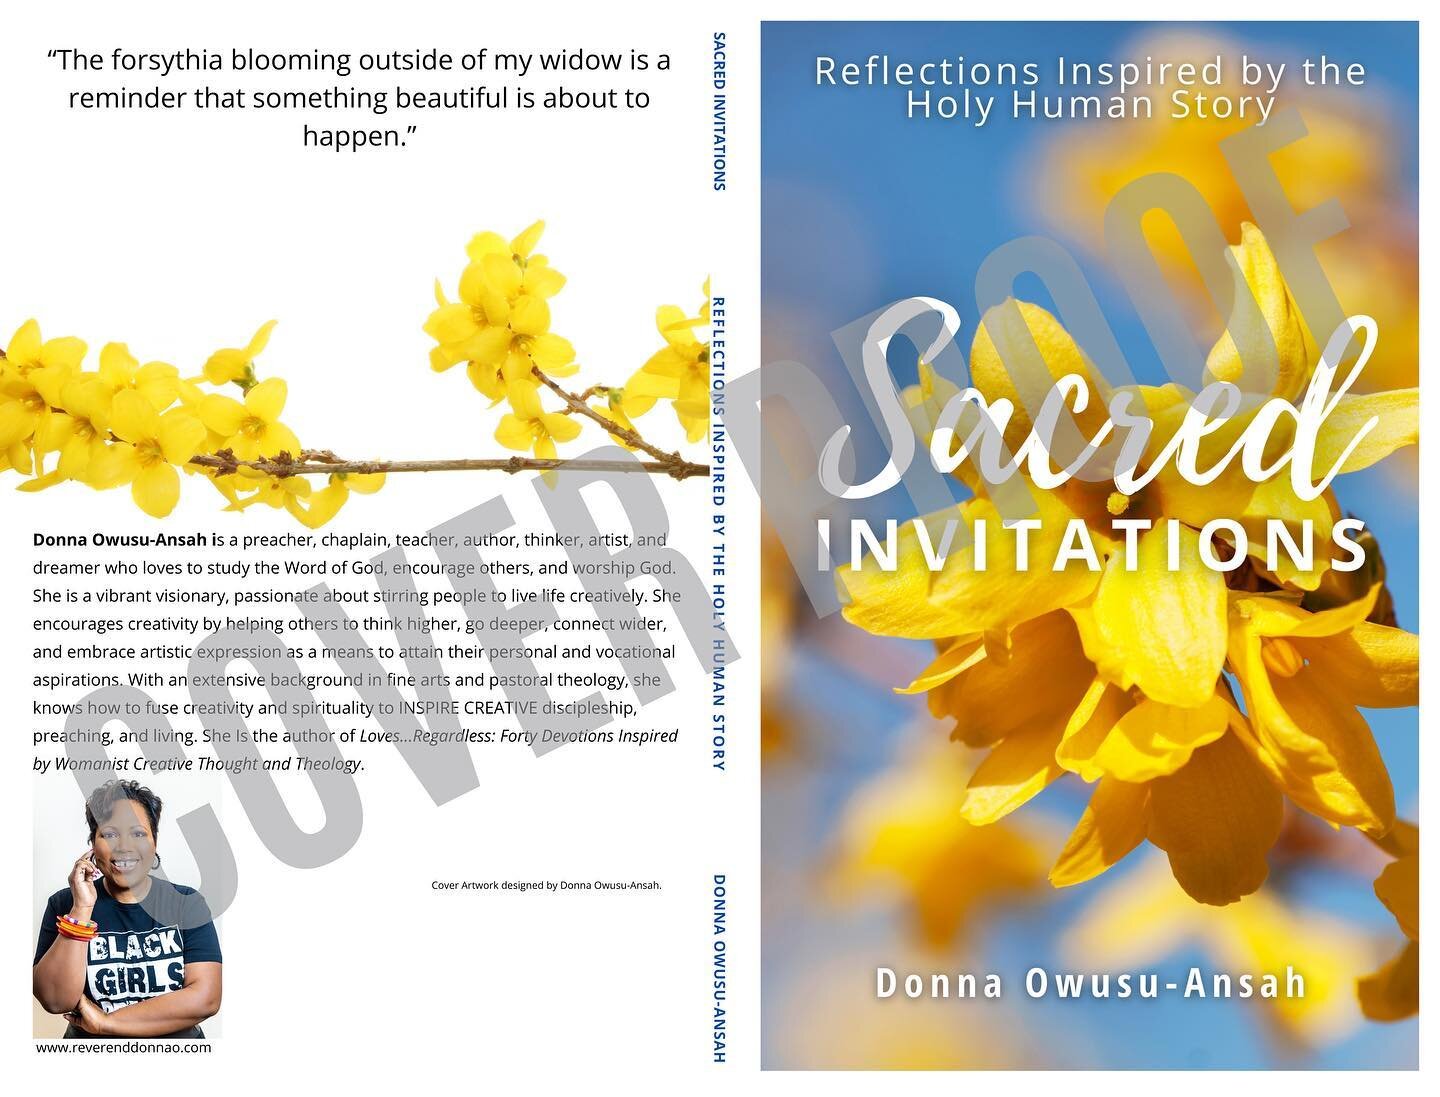 I have a thing for forsythia and the forsythia bush sprouting in my yard reminded me that I never posted the book cover proofs. Which one speaks to you? Let me know. #reverenddonnao #sacredinvitations #inspiringcreativityinlifeandministry